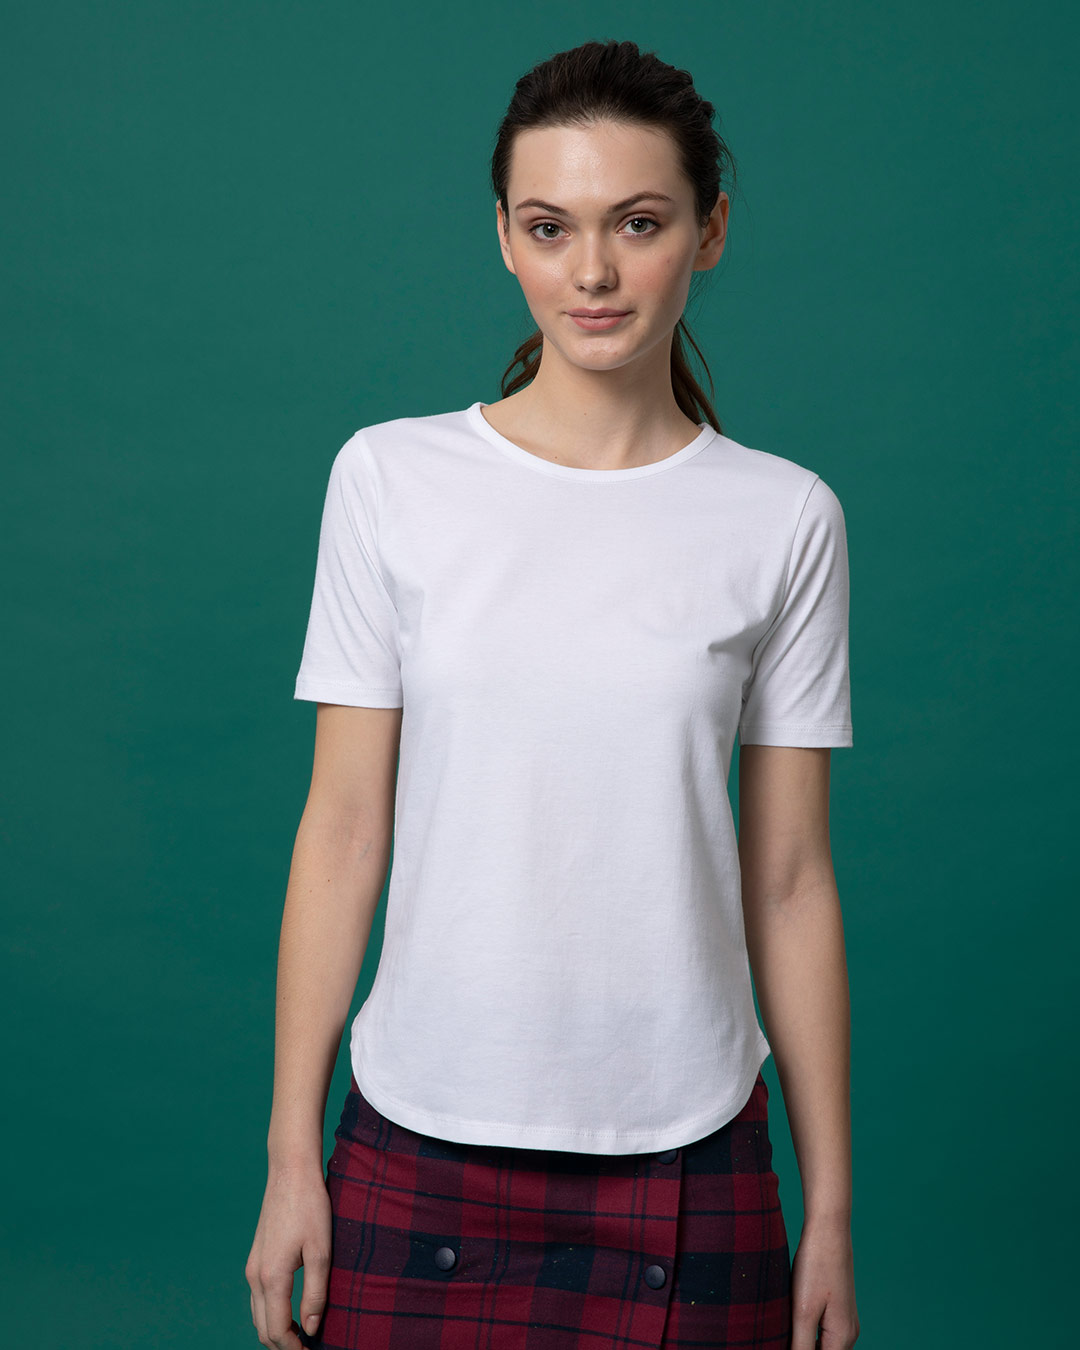 White T Shirt Women : Rated: The 20 Best White T-Shirts on Amazon | Who What Wear : J.crew 